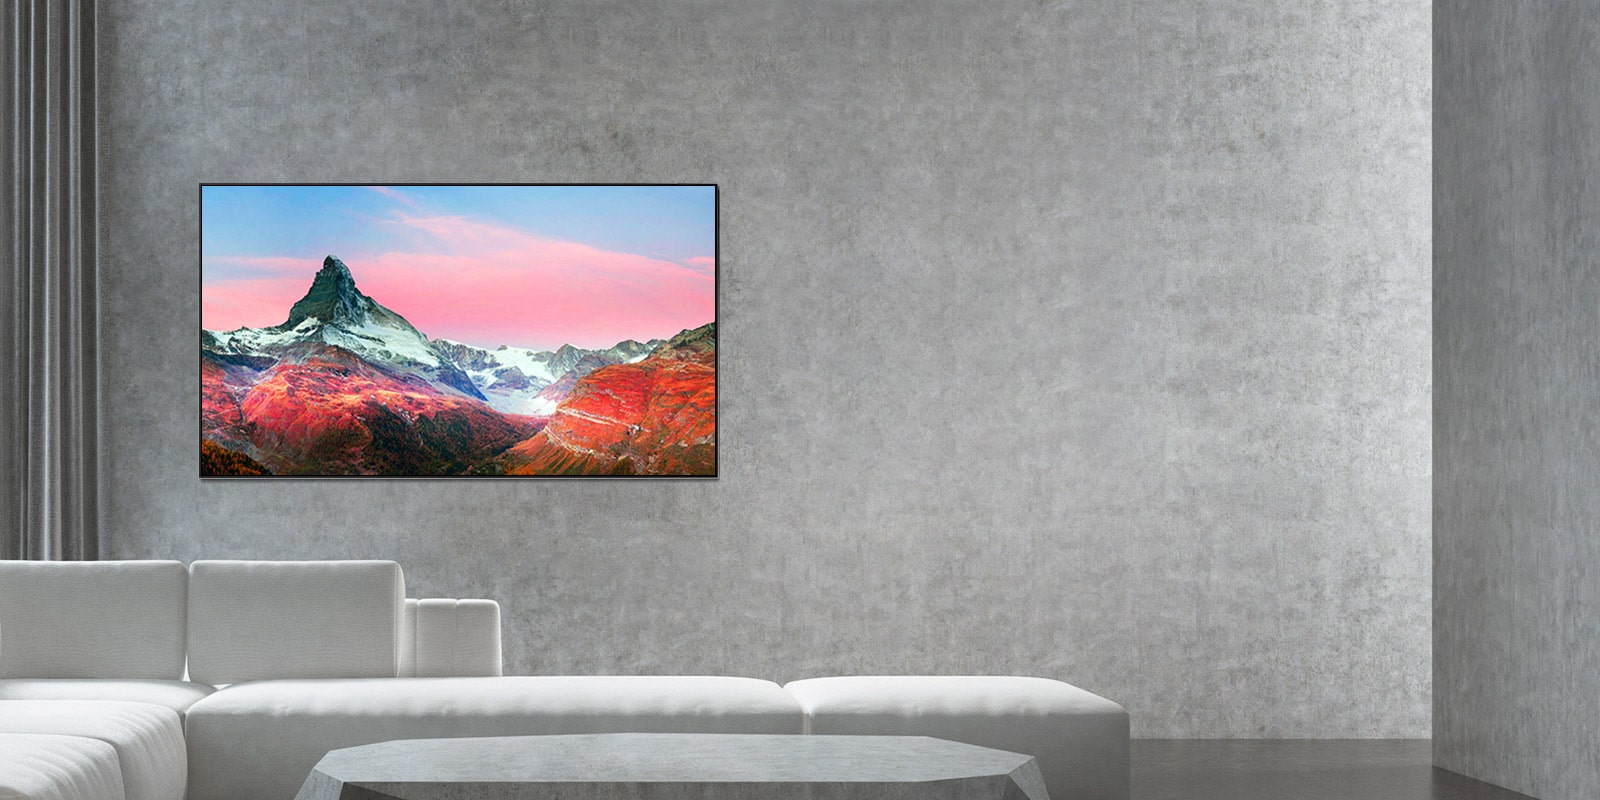 LG OLED TV Reliability<br>1